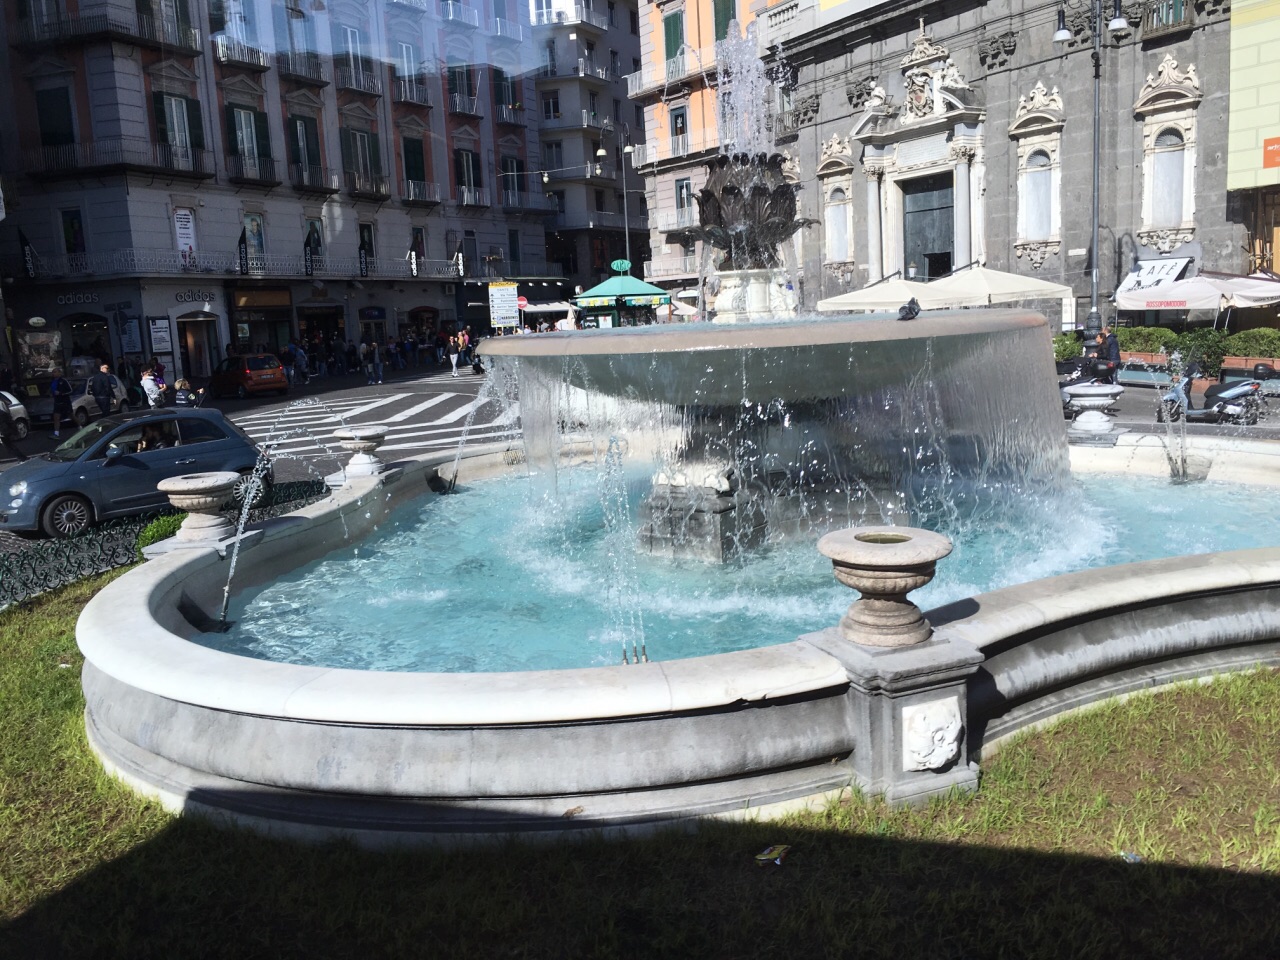 Piazza Trieste e Trento attraction reviews - Piazza Trieste e Trento  tickets - Piazza Trieste e Trento discounts - Piazza Trieste e Trento  transportation, address, opening hours - attractions, hotels, and food